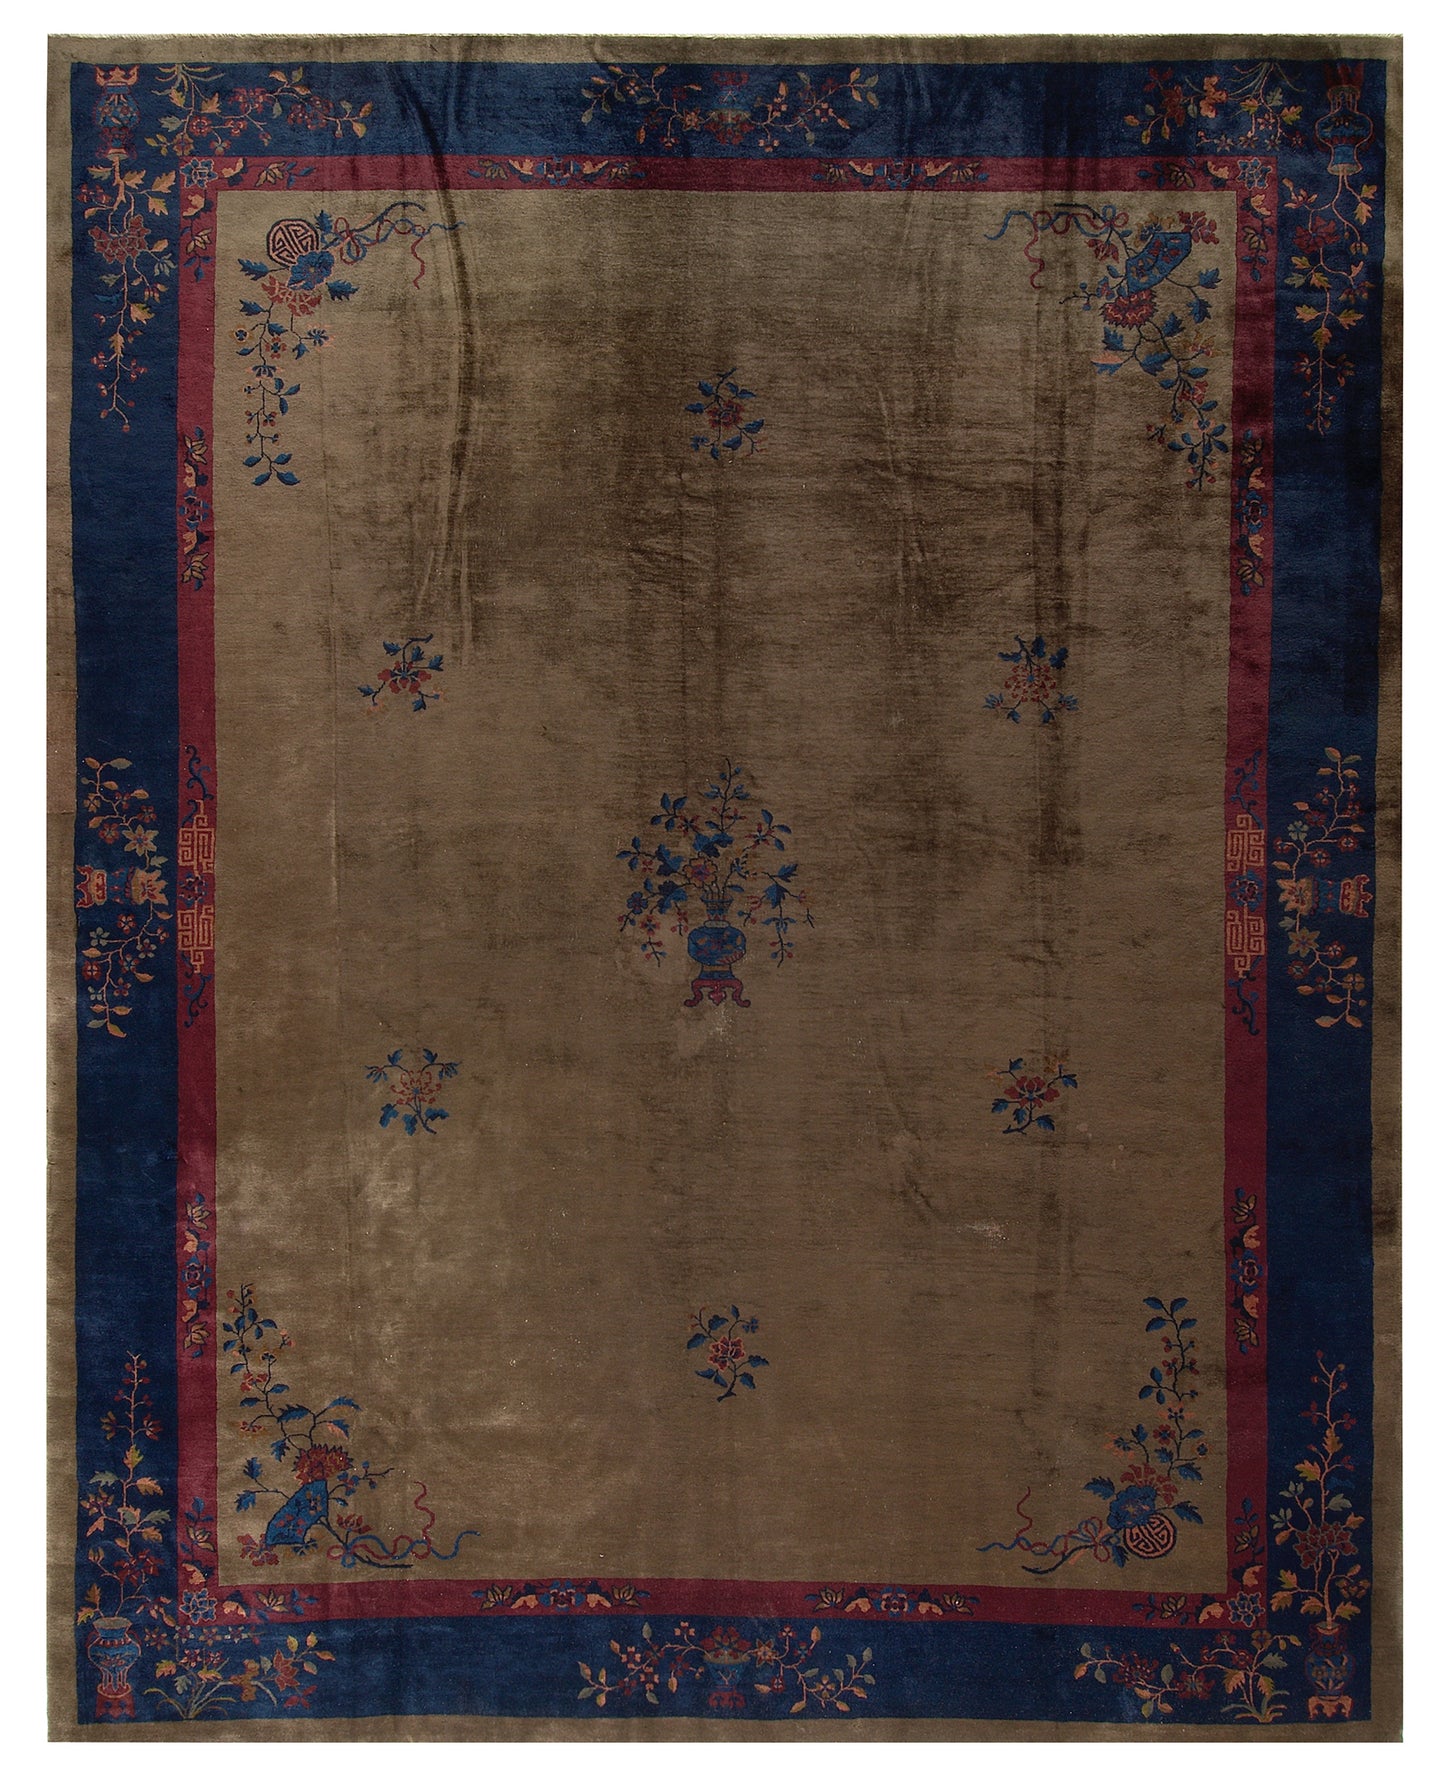 11x14 Grey Chinese Art Deco Area Rug